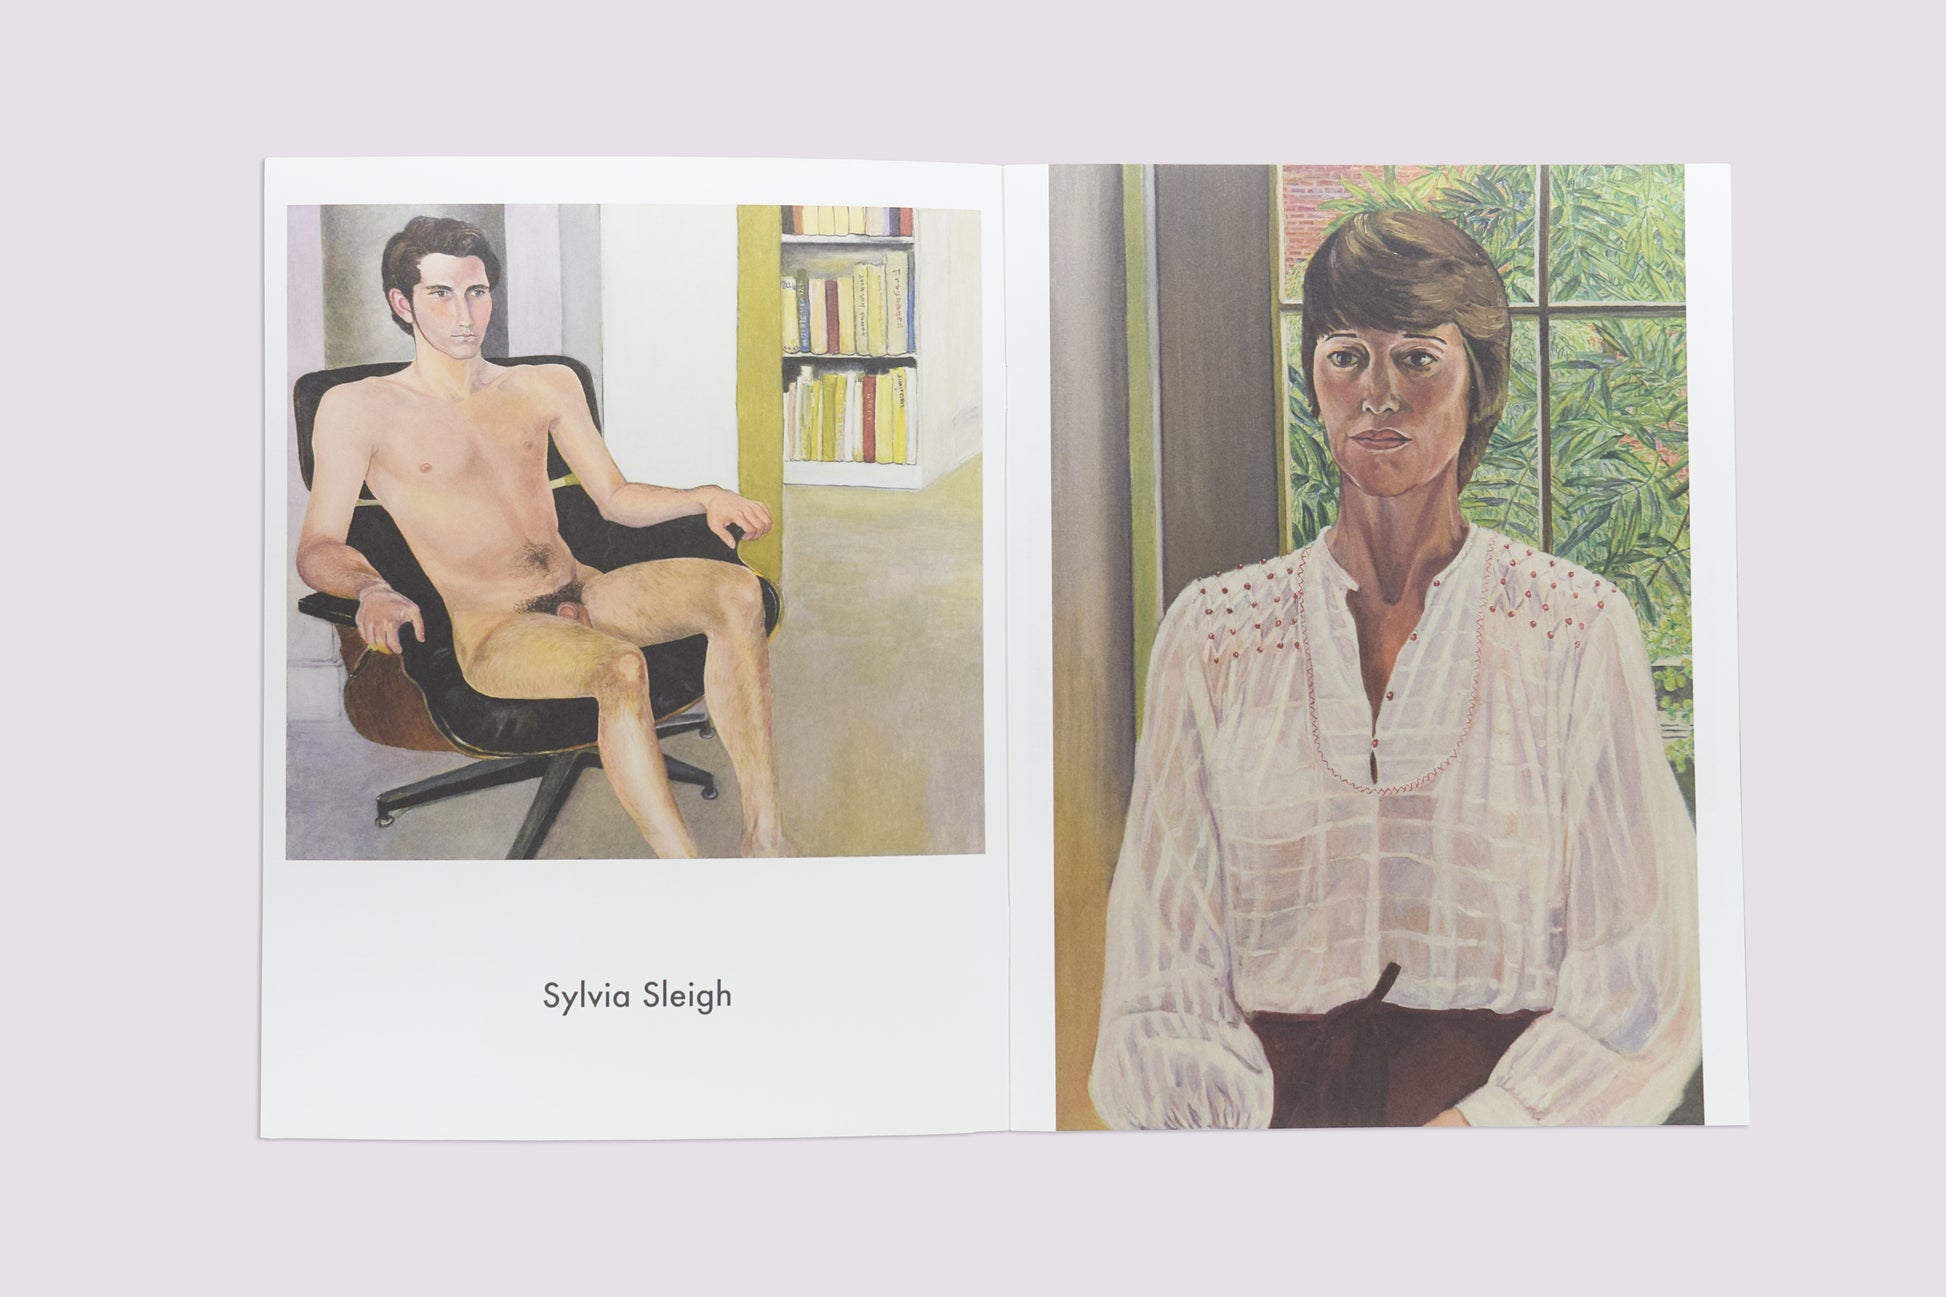 Sylvia Sleigh published by Nieves